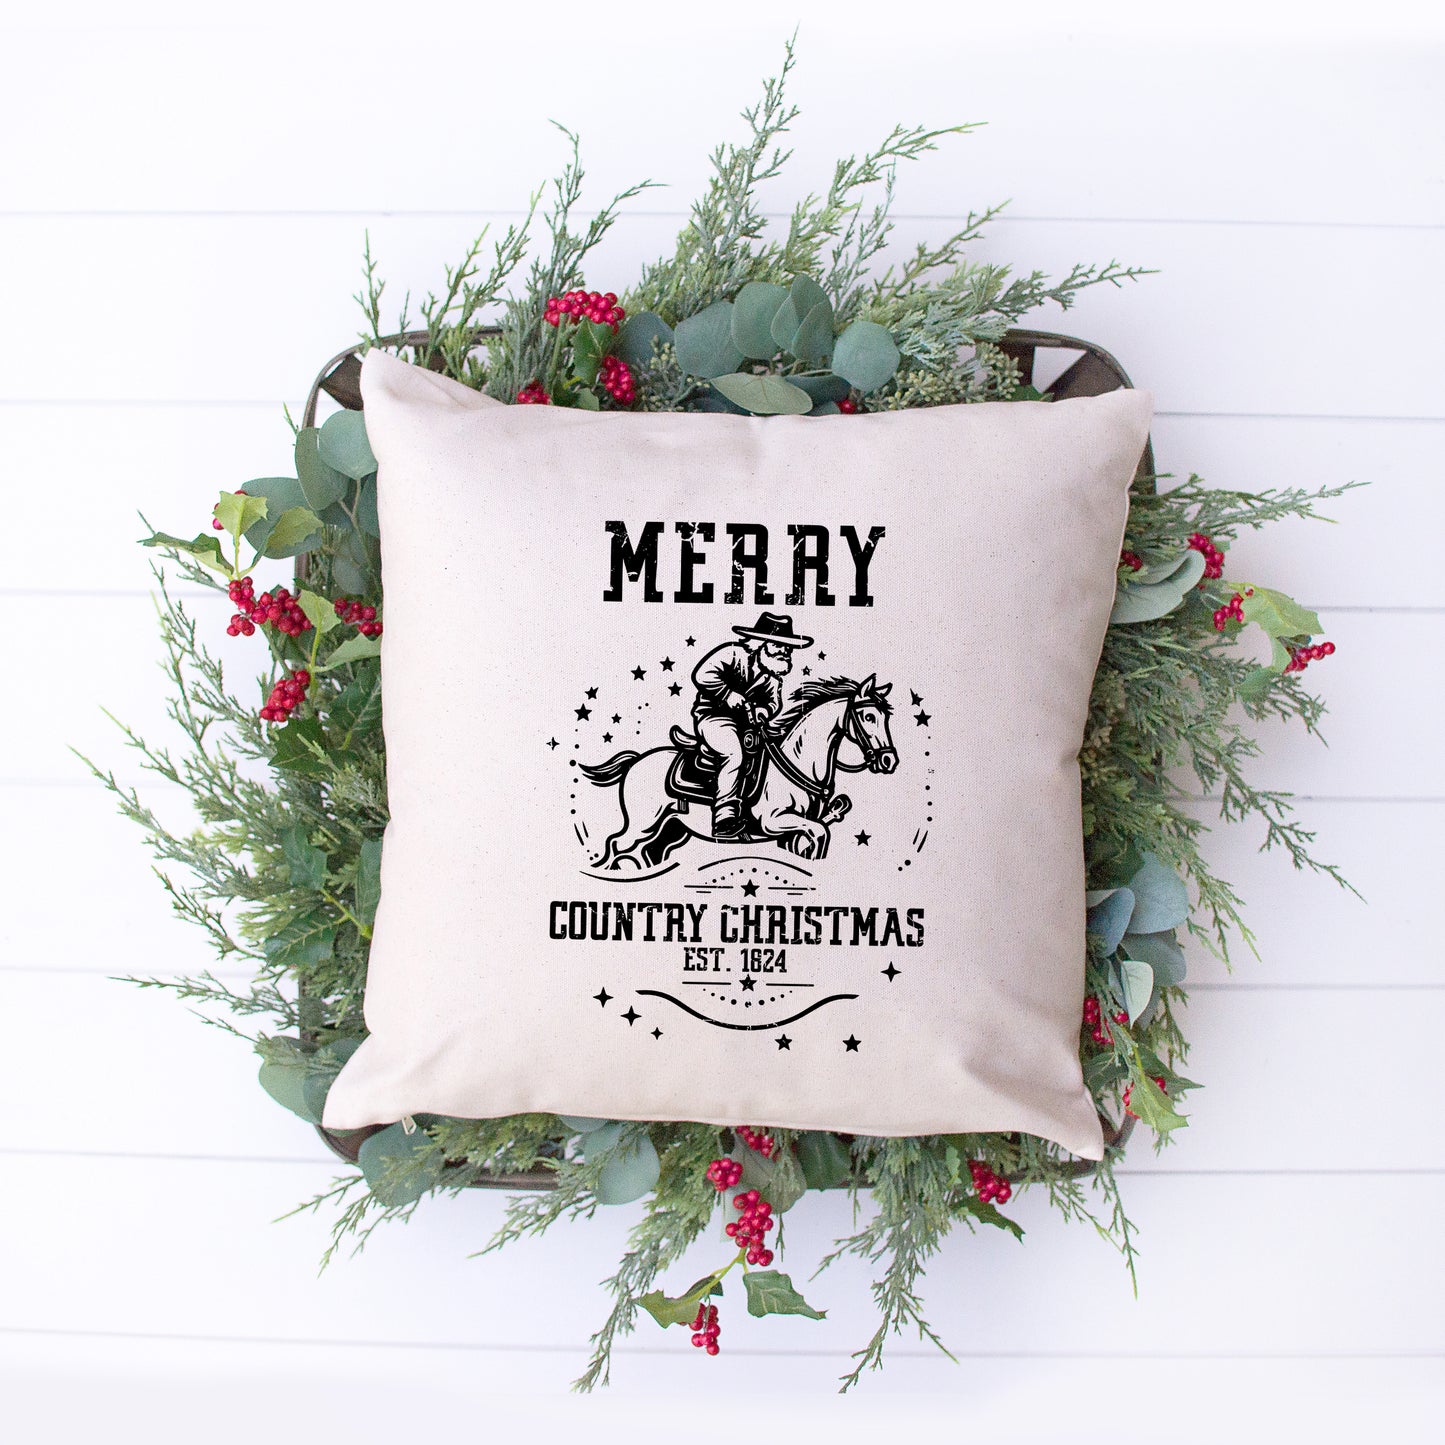 Merry Country Christmas | Pillow Cover